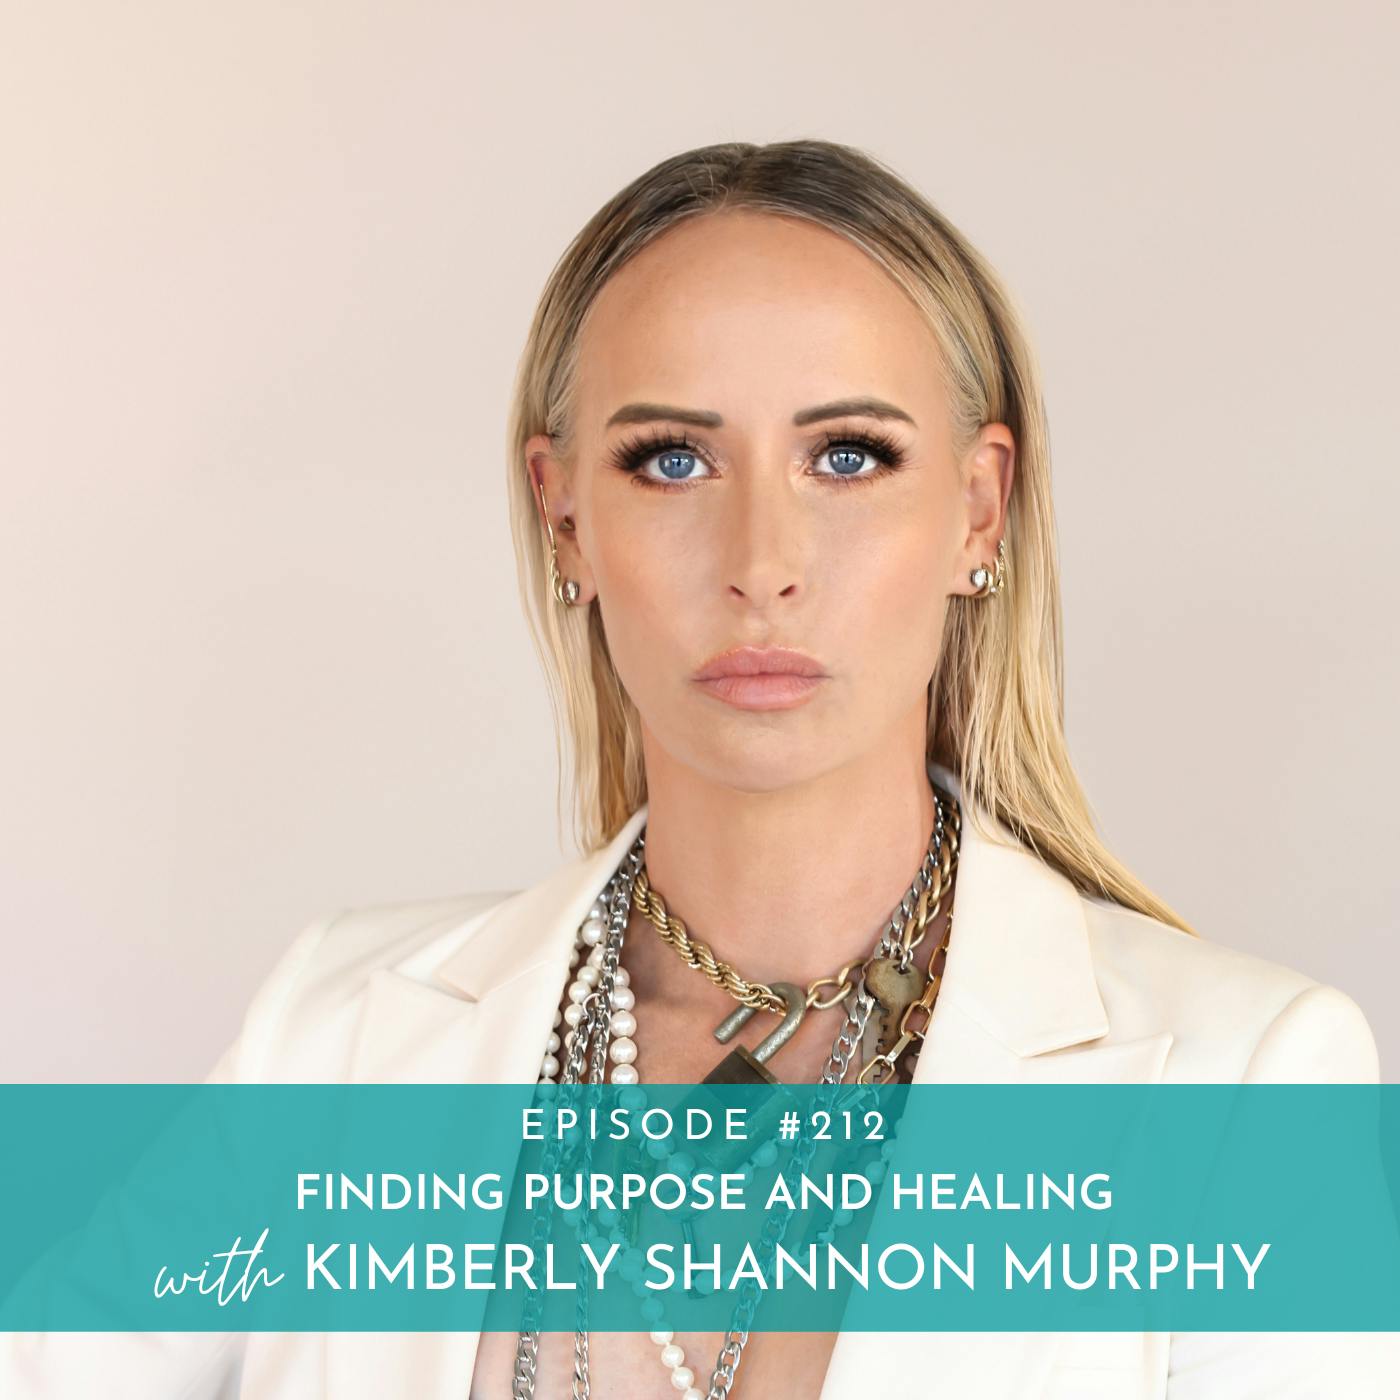 Finding Purpose and Healing with Kimberly Shannon Murphy